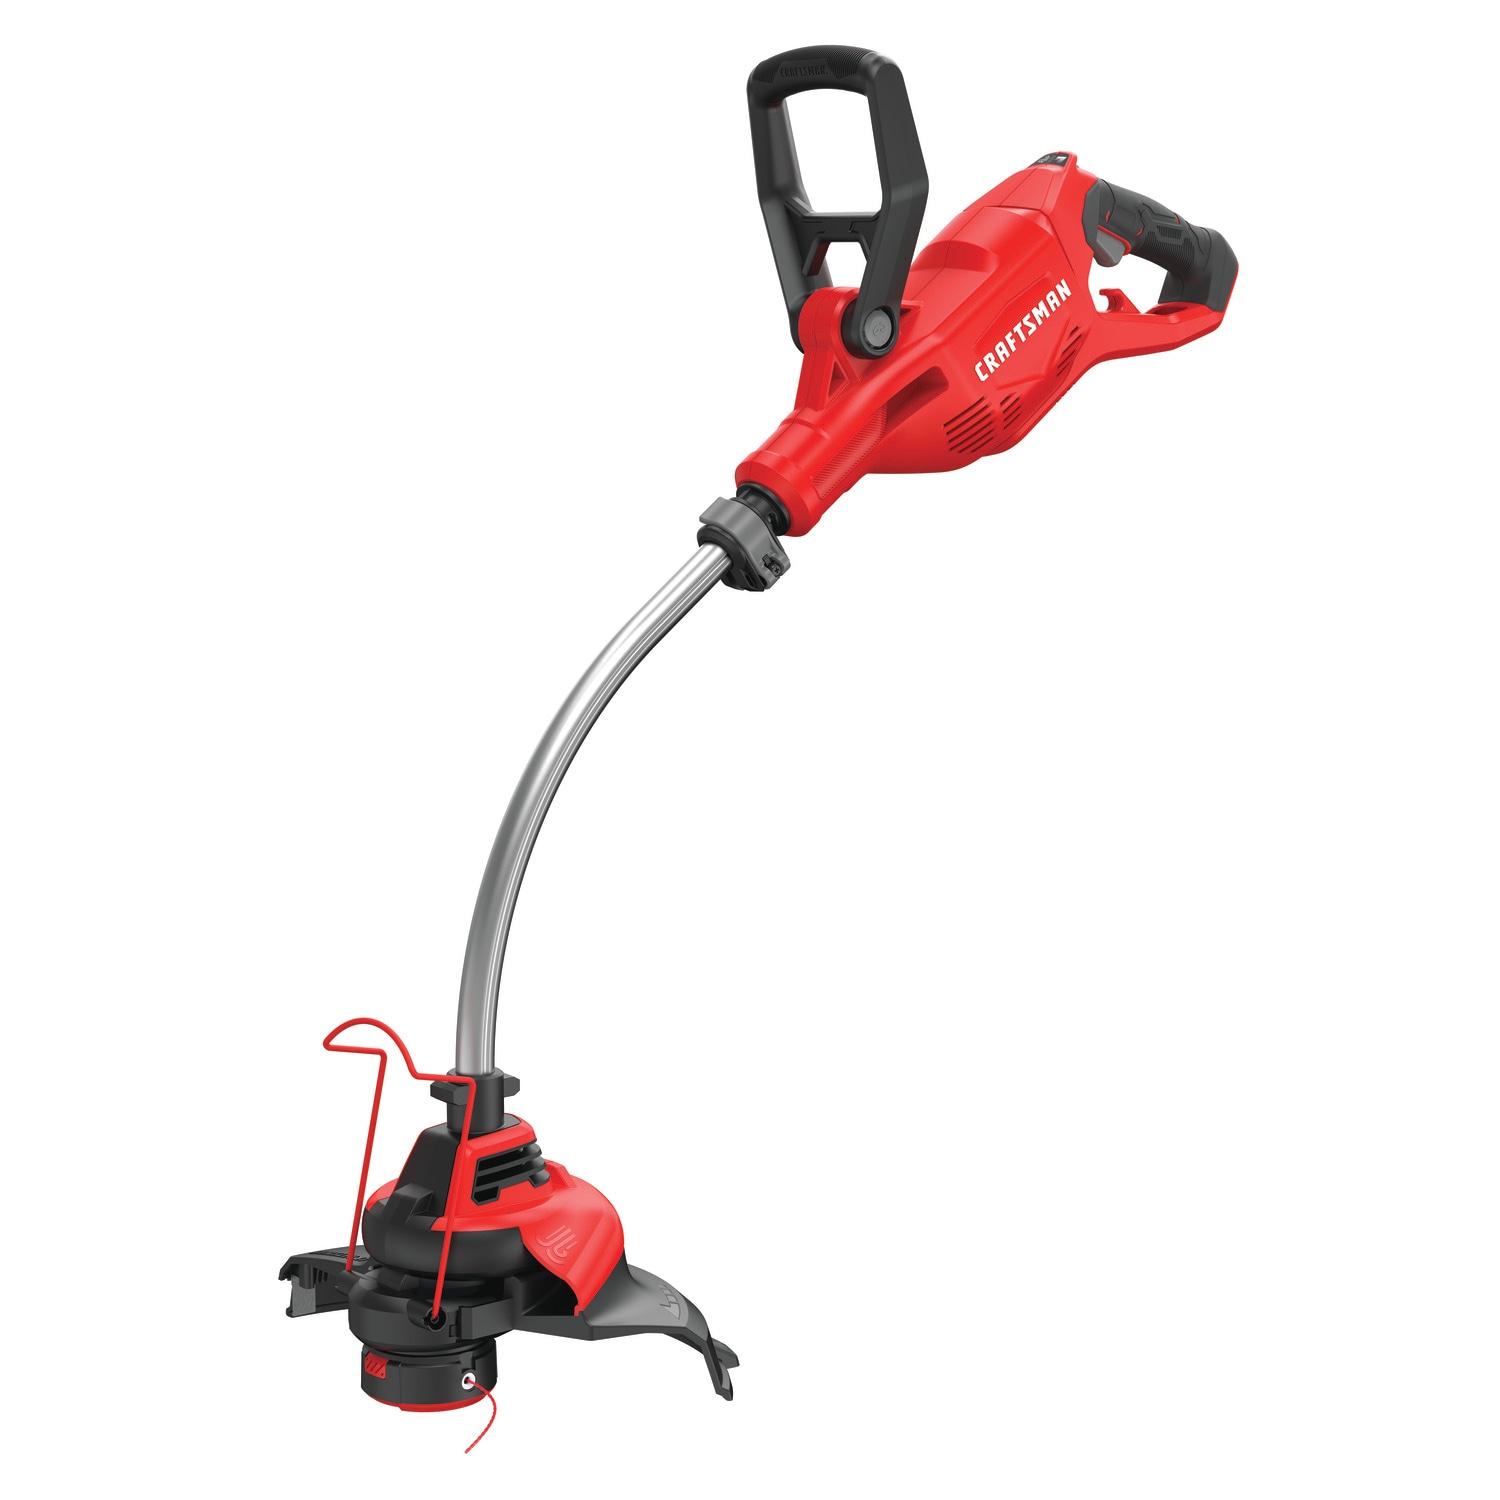 CRAFTSMAN 8.5-Amp 14-in Corded Electric at Lowes.com